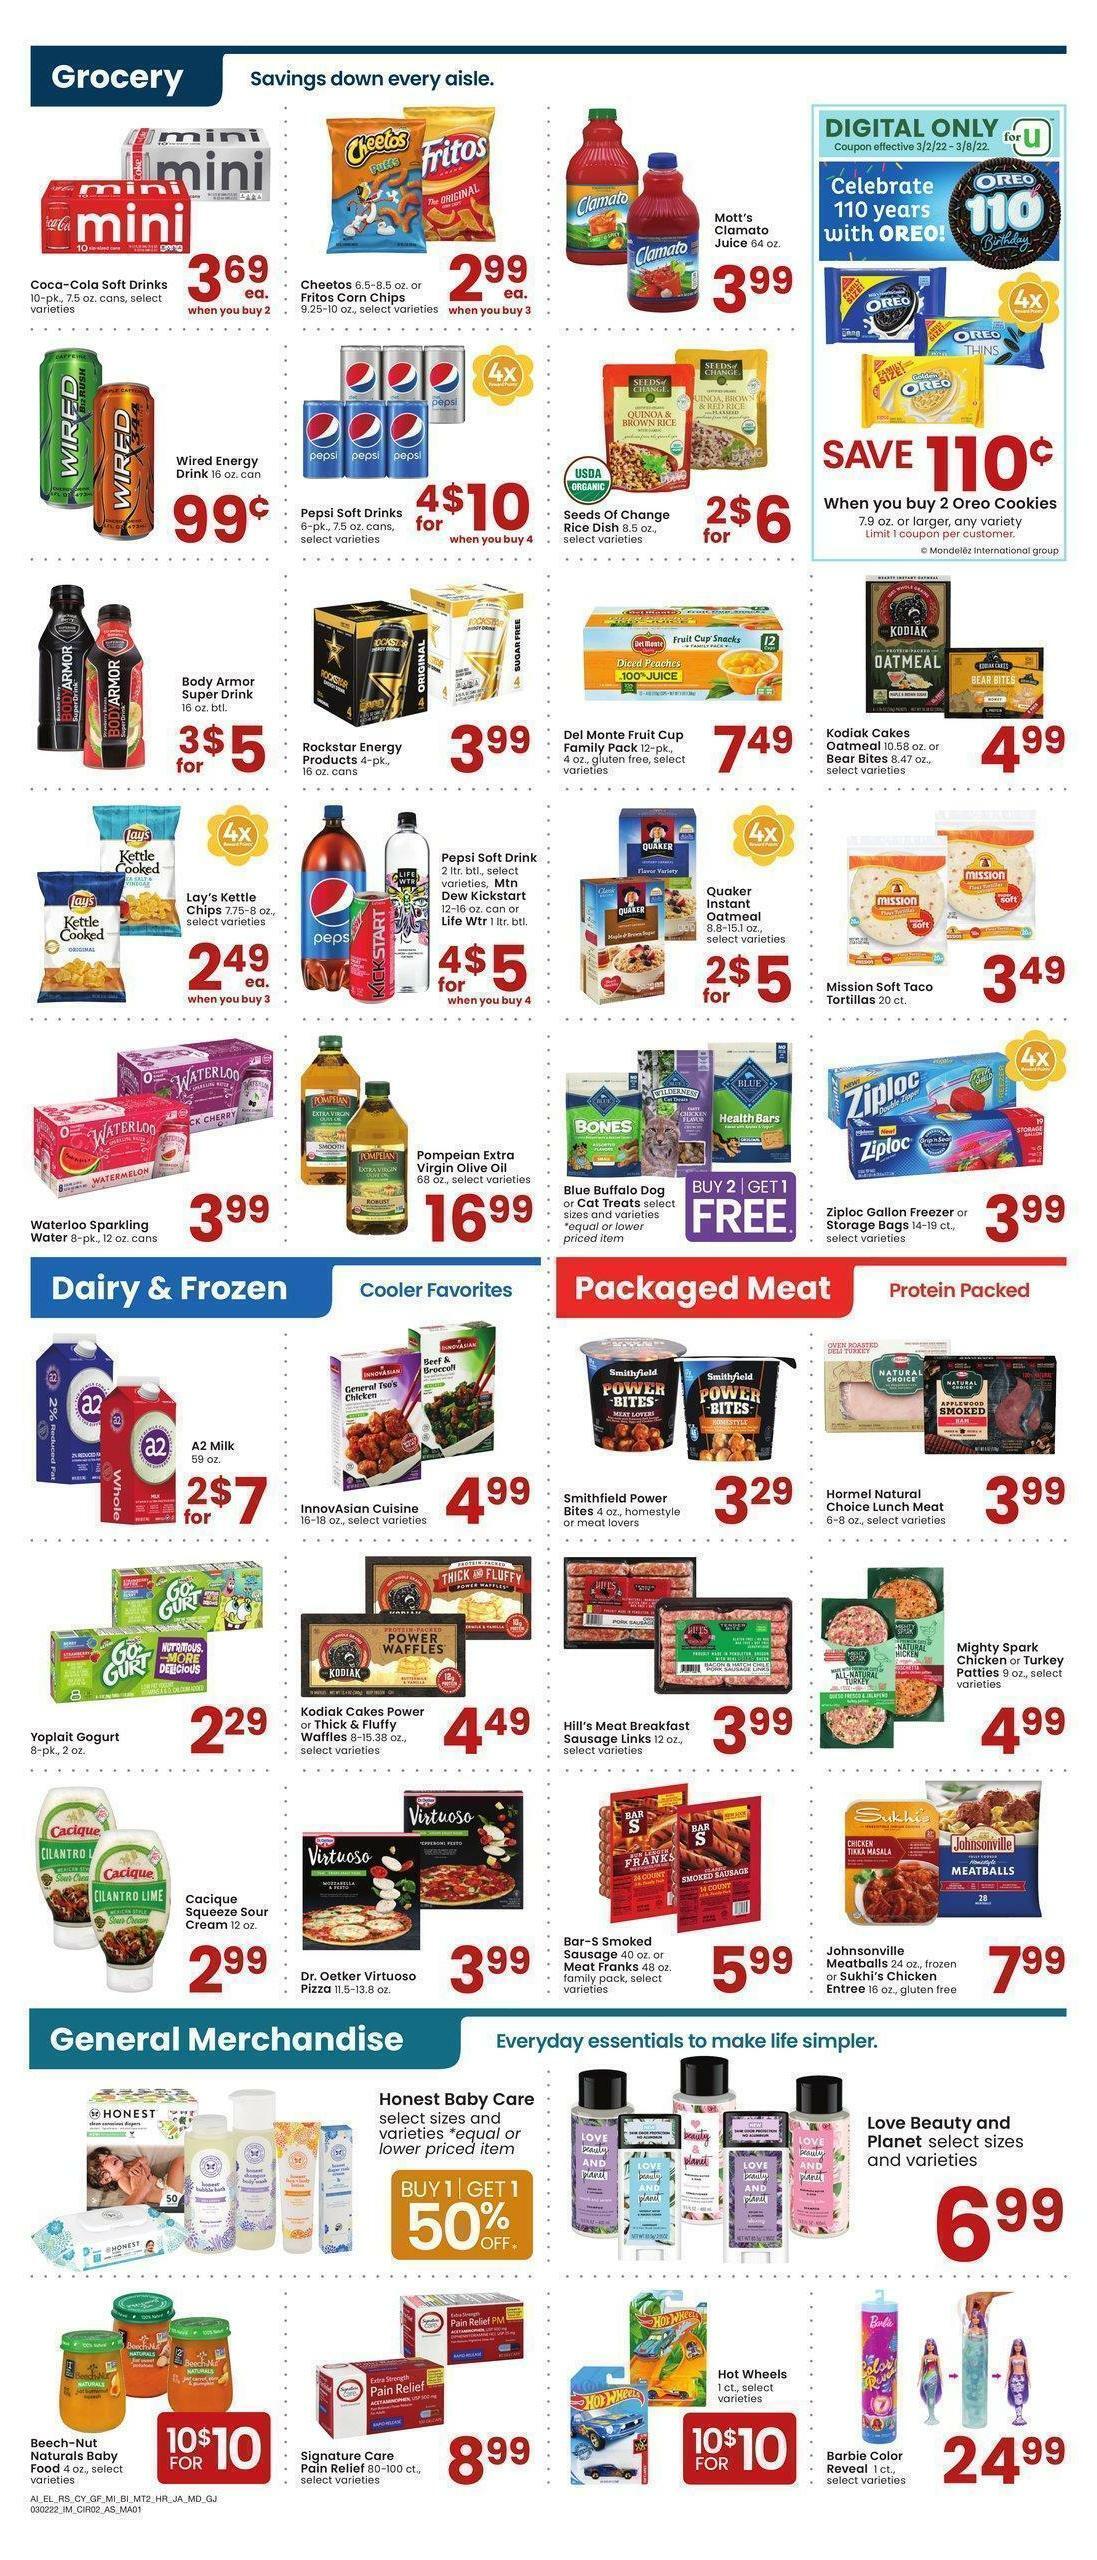 Albertsons Weekly Ad from March 2